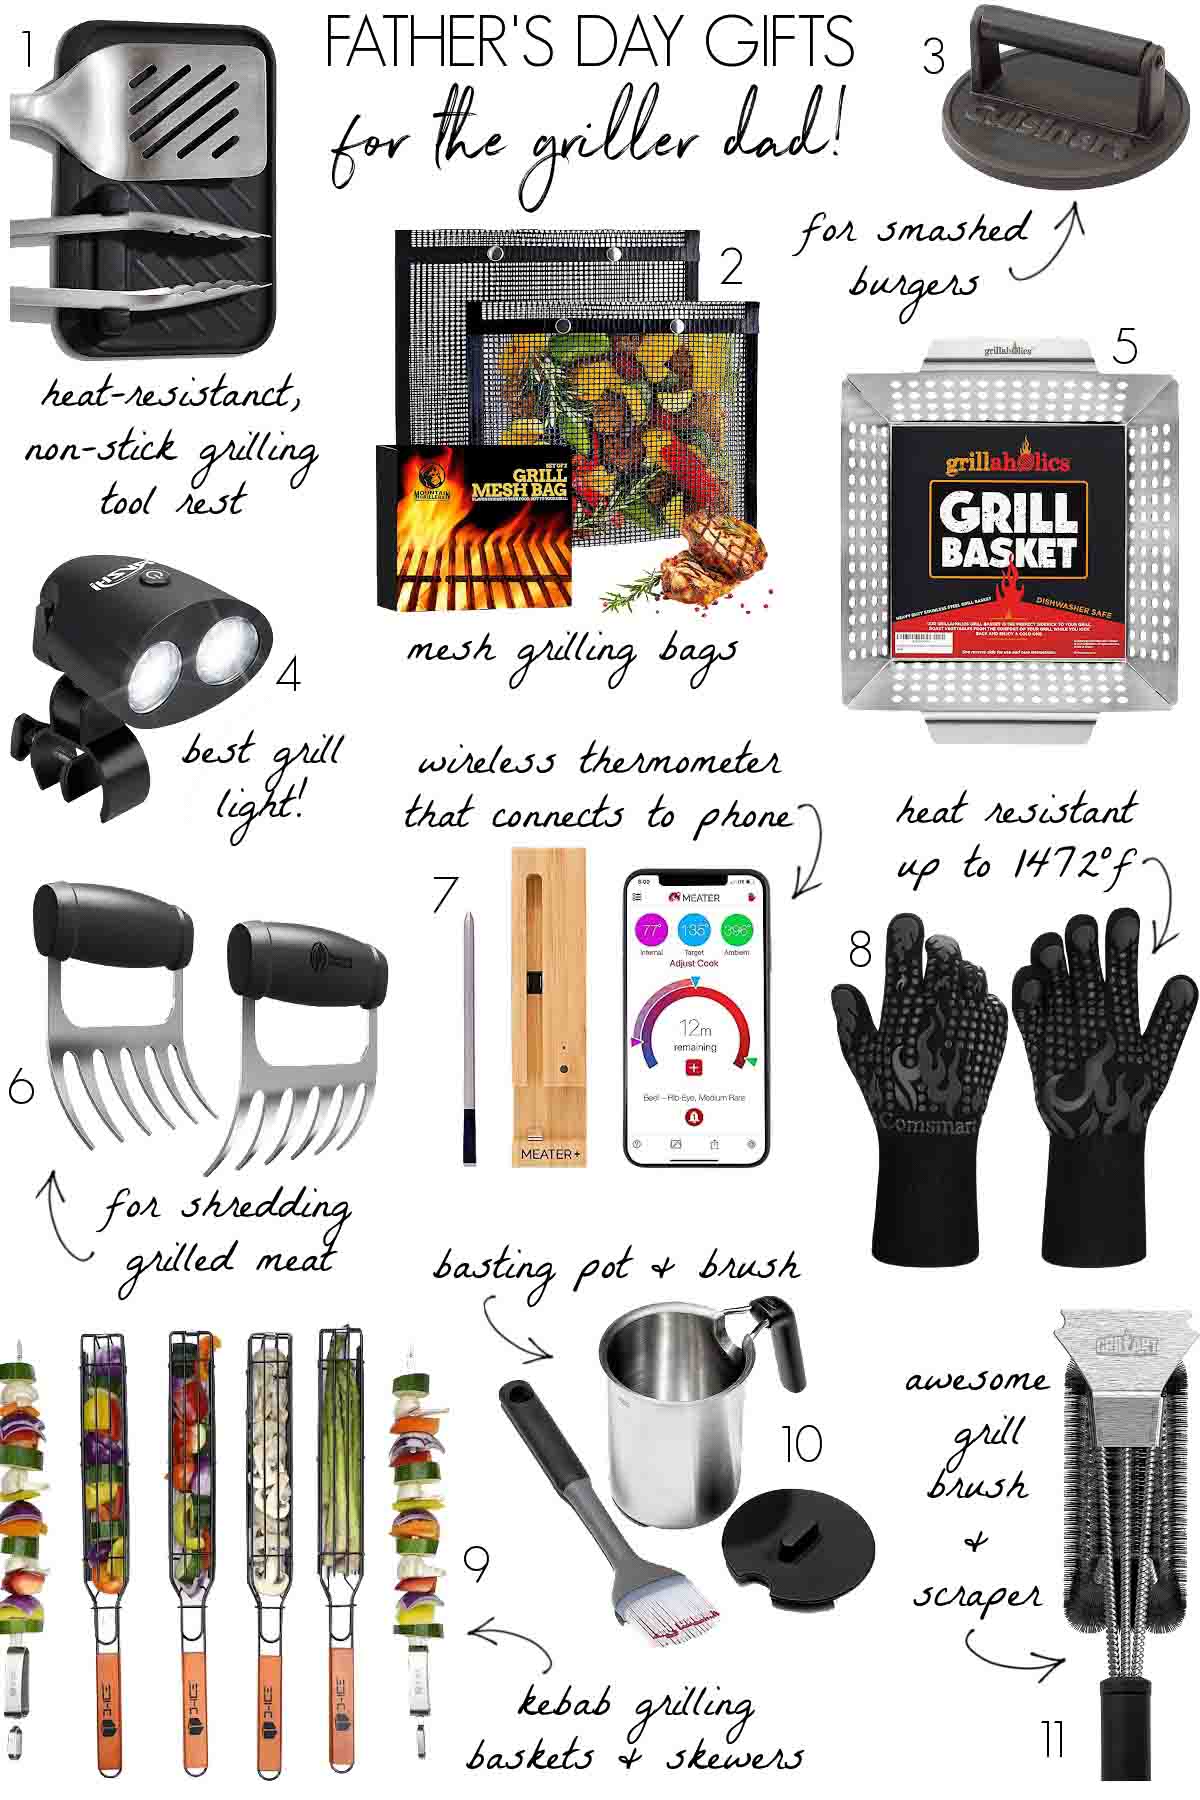 Father's Day Gift Guide: Fun Present Ideas for Dads – thetidydad.com